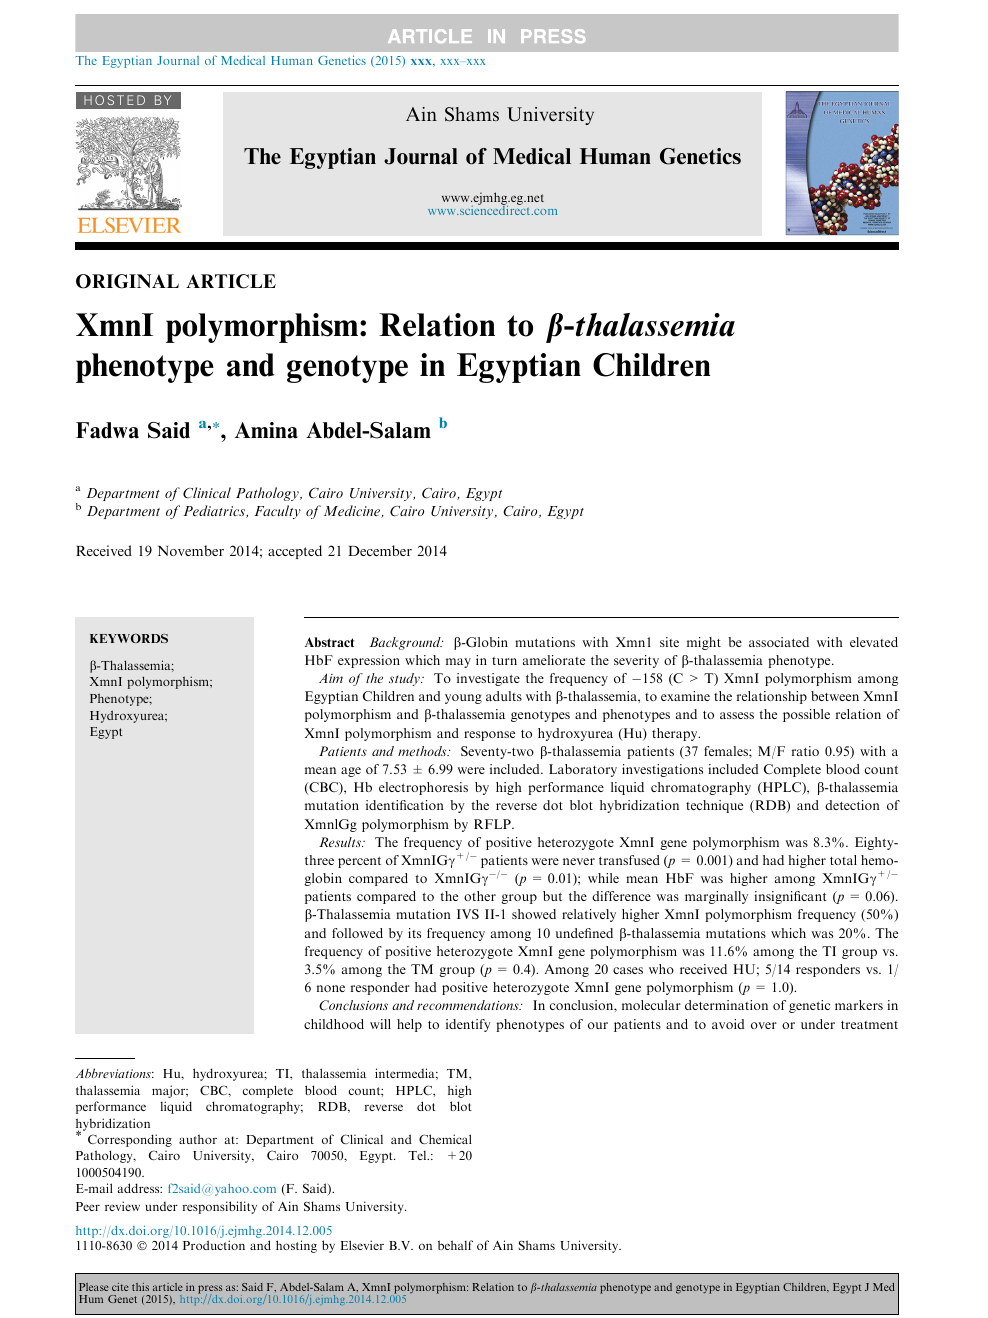 Xmni Polymorphism Relation To B Thalassemia Phenotype And Genotype In Egyptian Children Topic Of Research Paper In Health Sciences Download Scholarly Article Pdf And Read For Free On Cyberleninka Open Science Hub